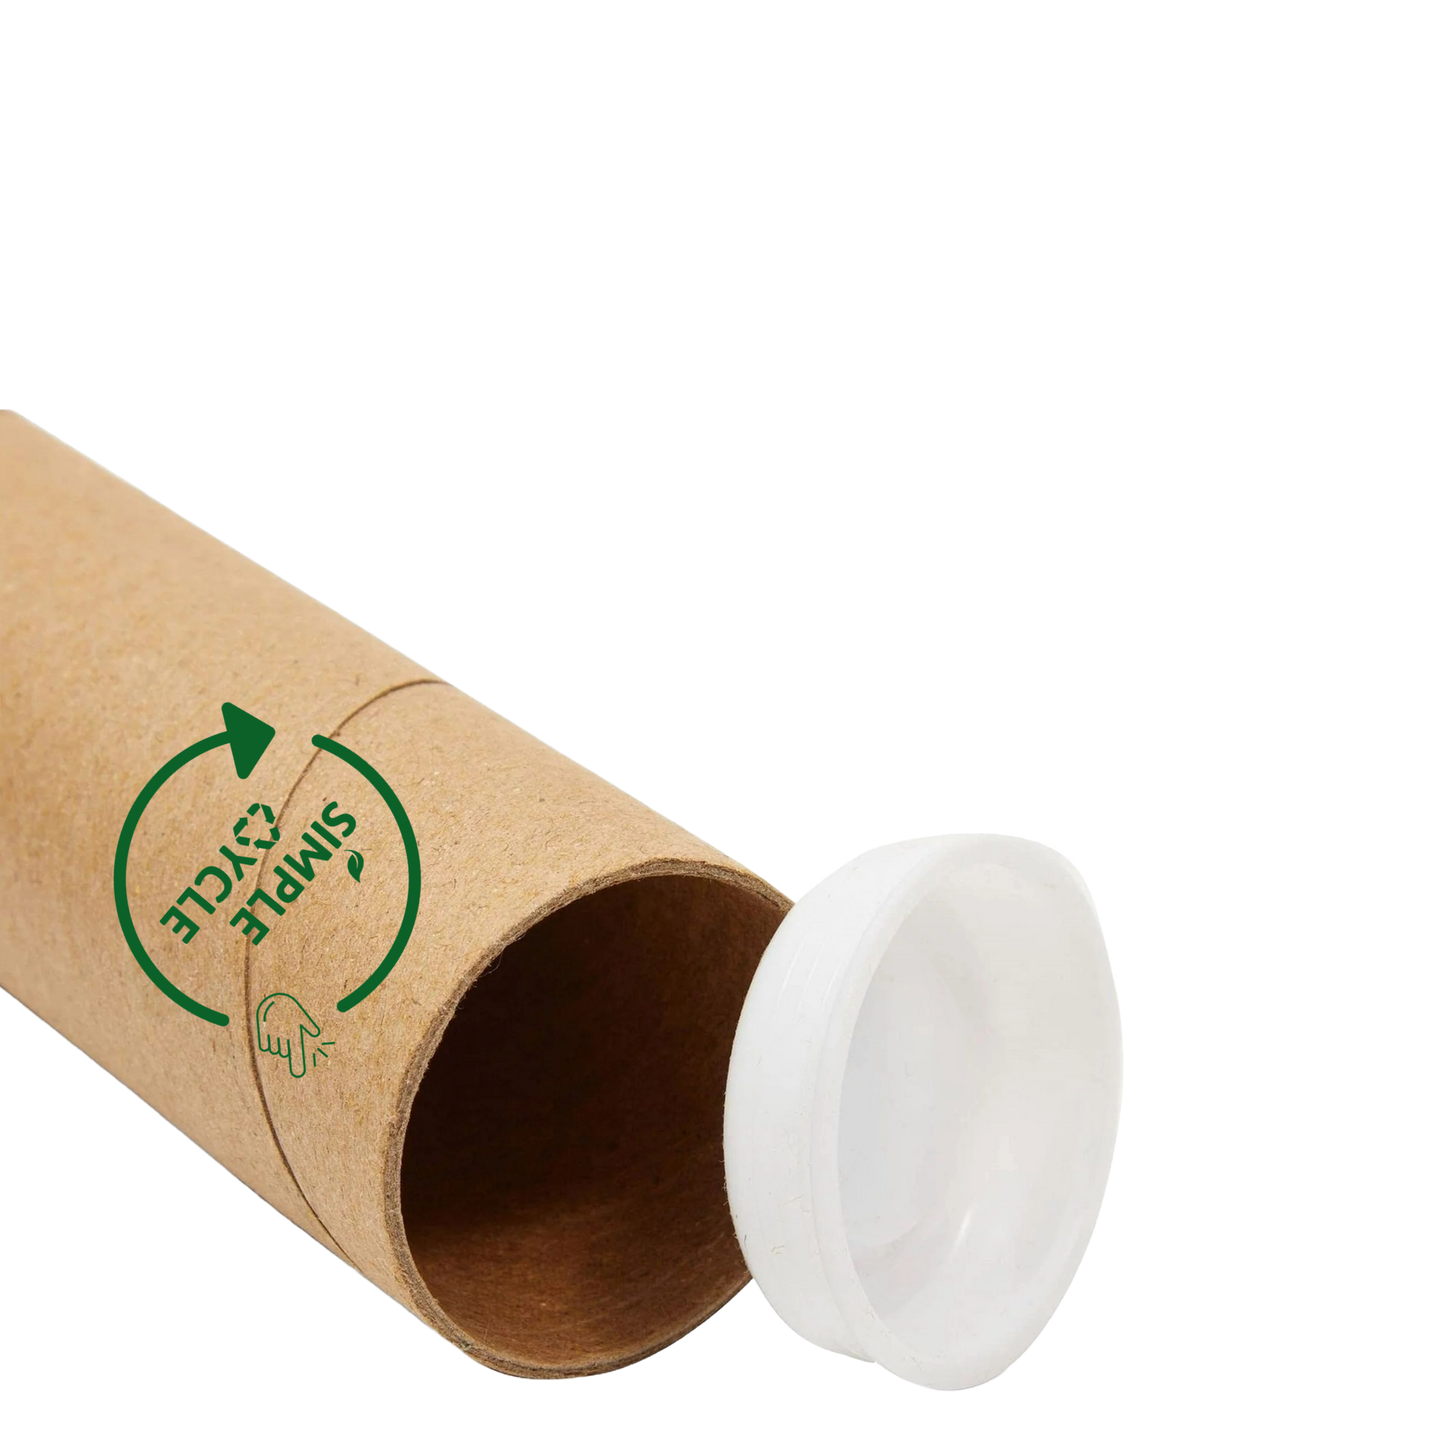 Plastic film recycling tube front showing caps